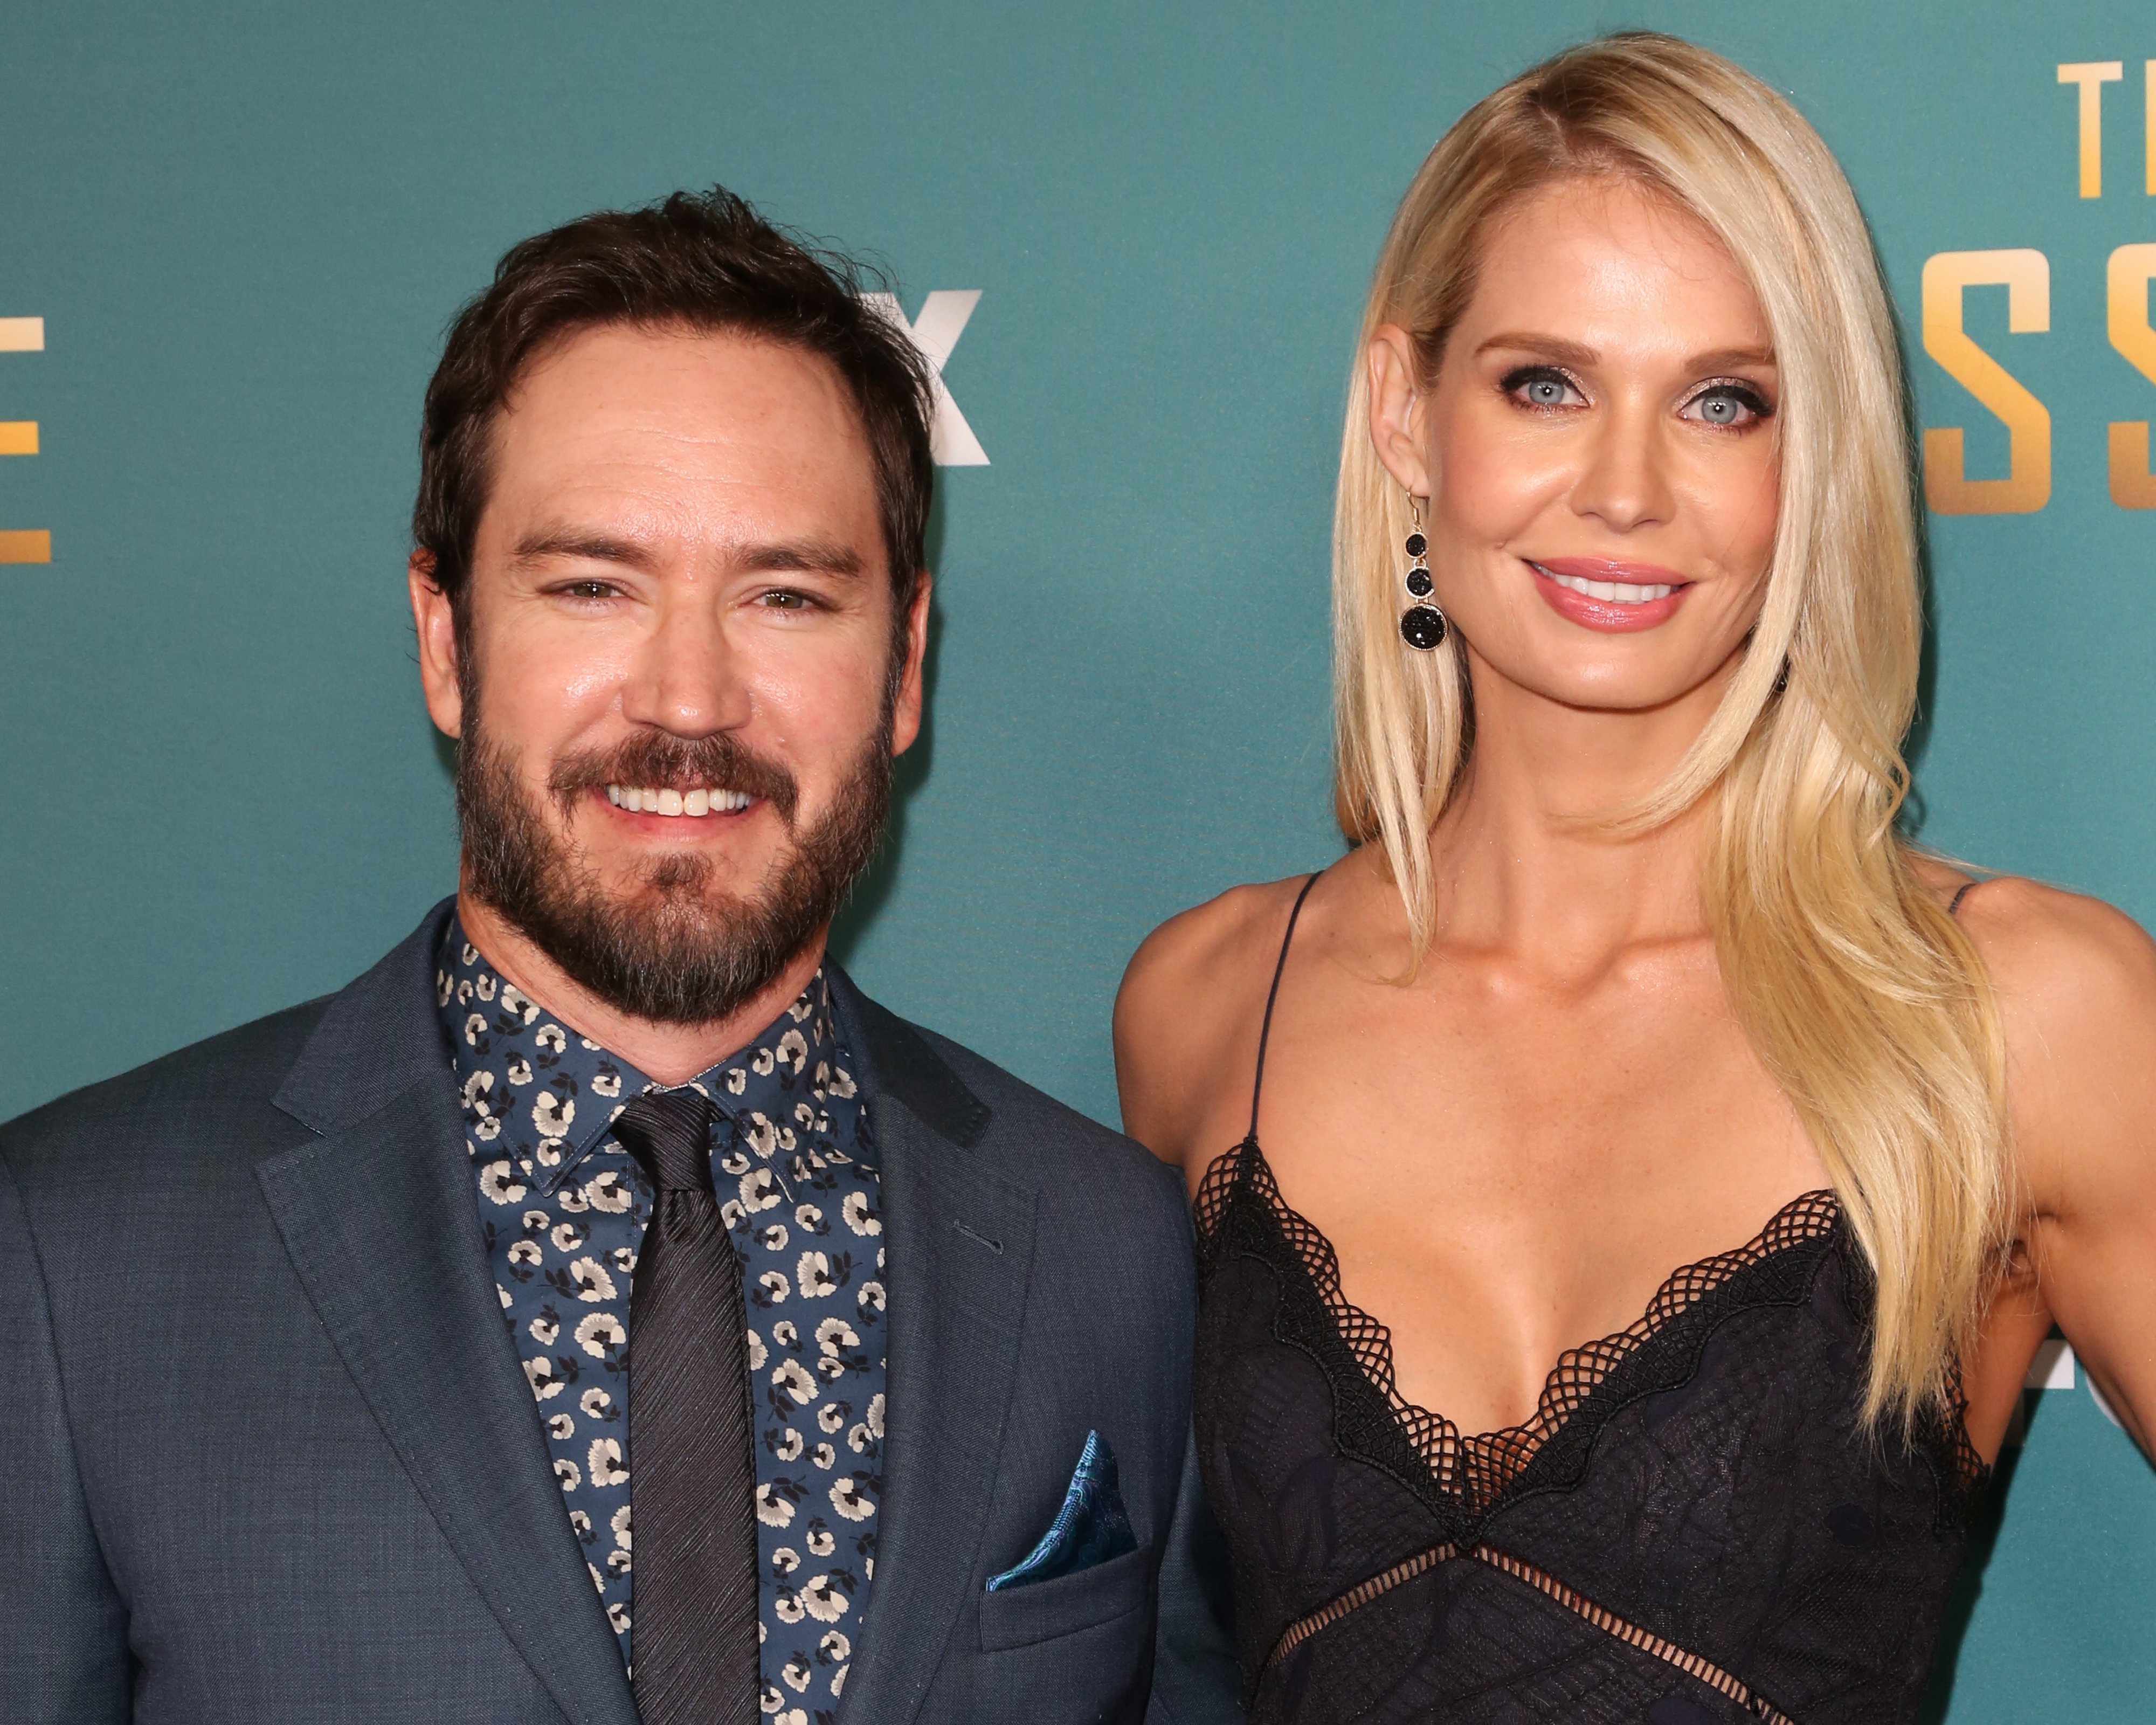 Mark-Paul Gosselaar and Catriona McGinn during FOX's "The Passage" premiere party at The Broad Stage on January 10, 2019 in Santa Monica, California. | Source: Getty Images